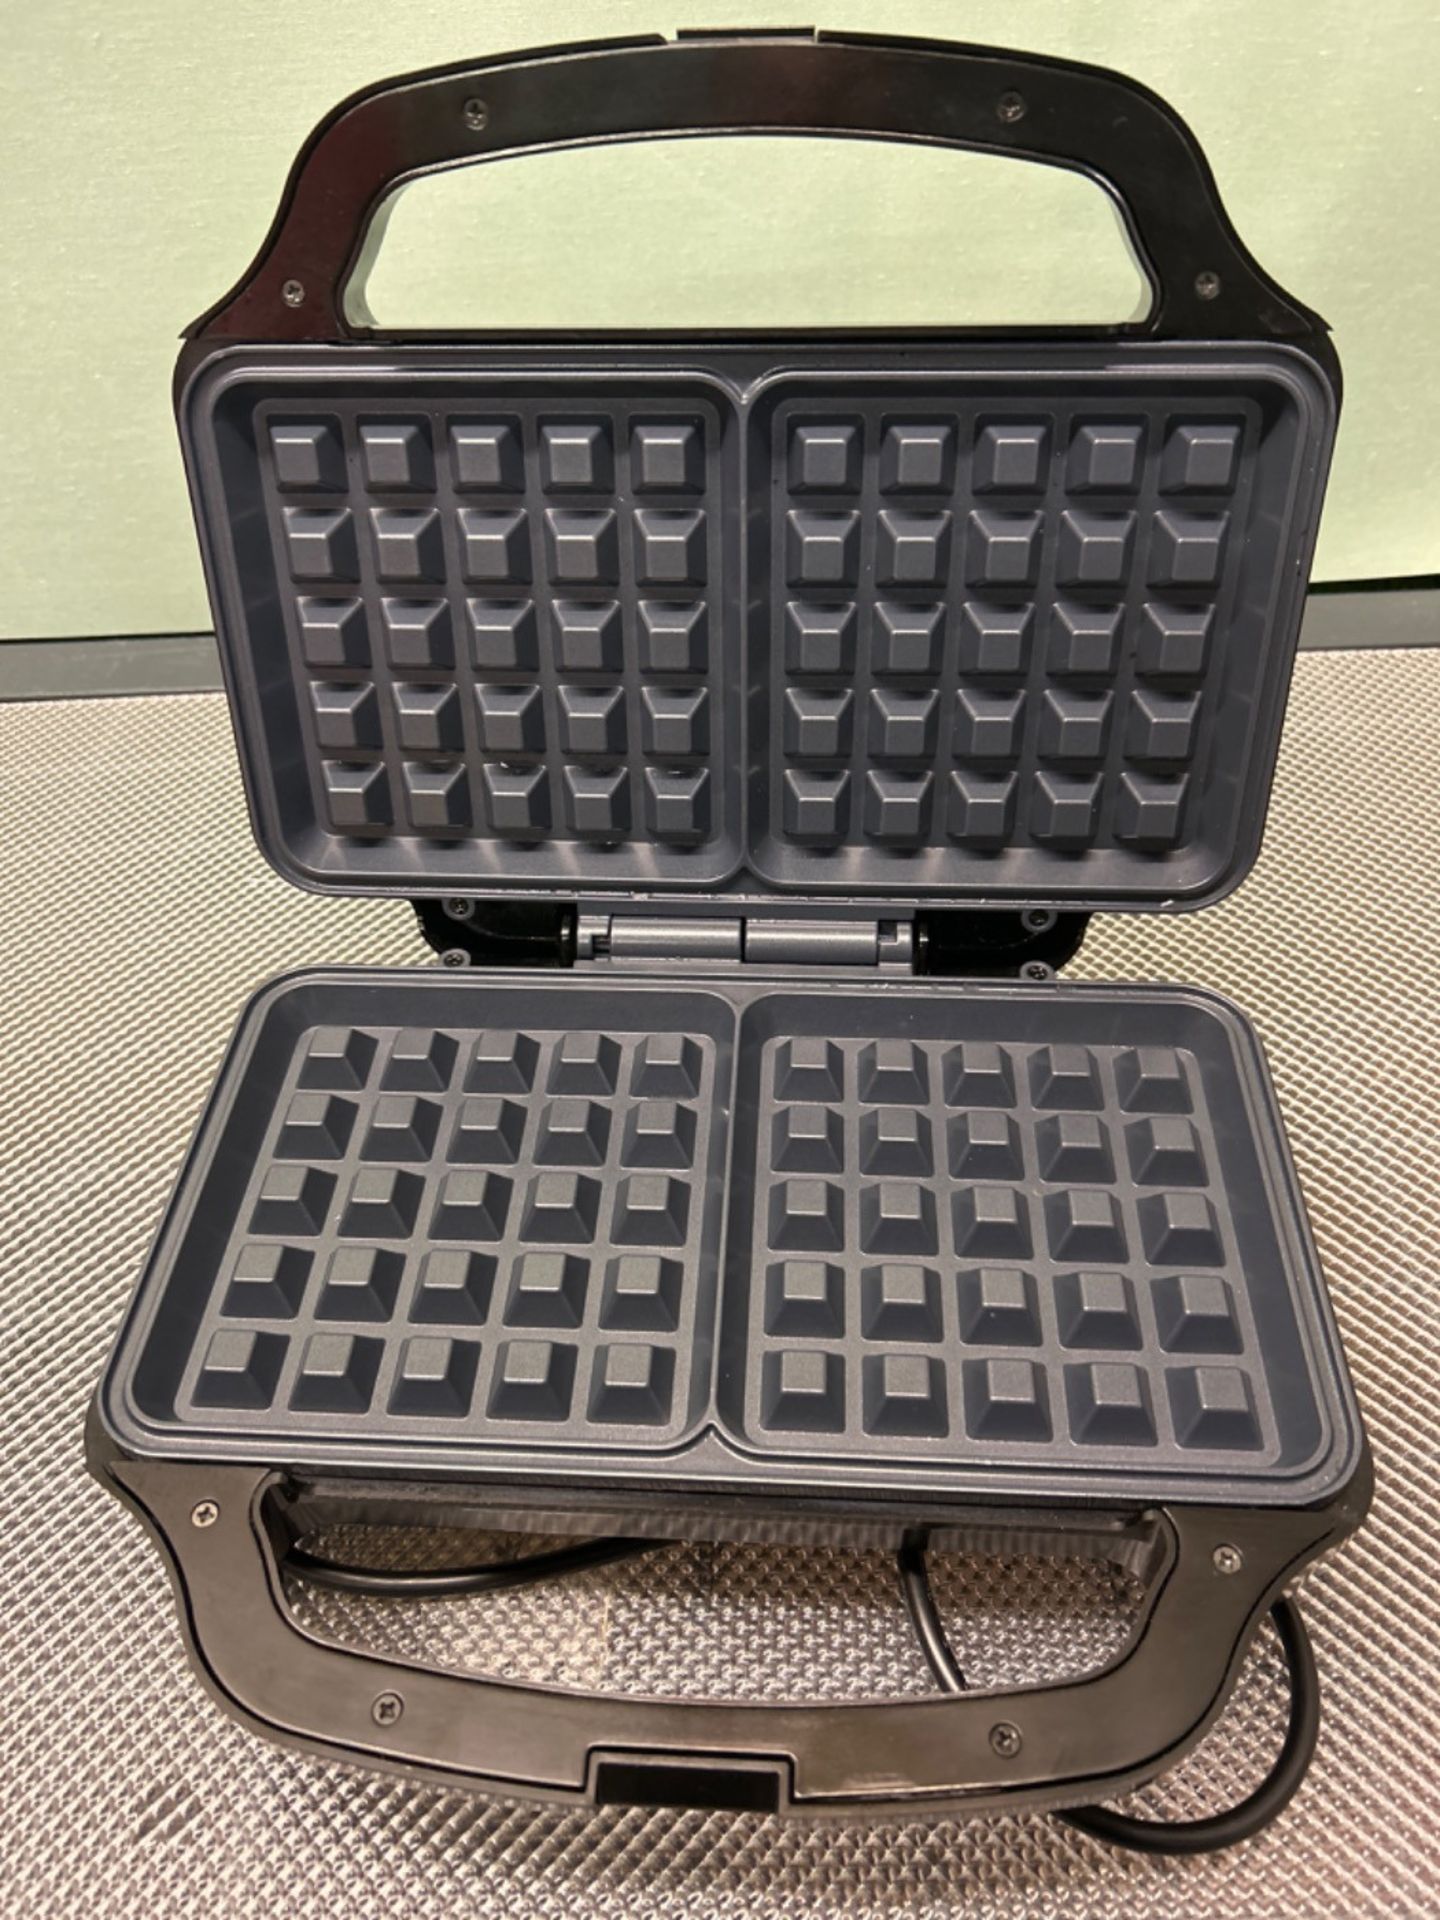 Salter EK2249 Deep Fill Waffle Maker ??Non-Stick Dual Waffle Iron, XL Cooking Plates, Automatic T - Image 2 of 3